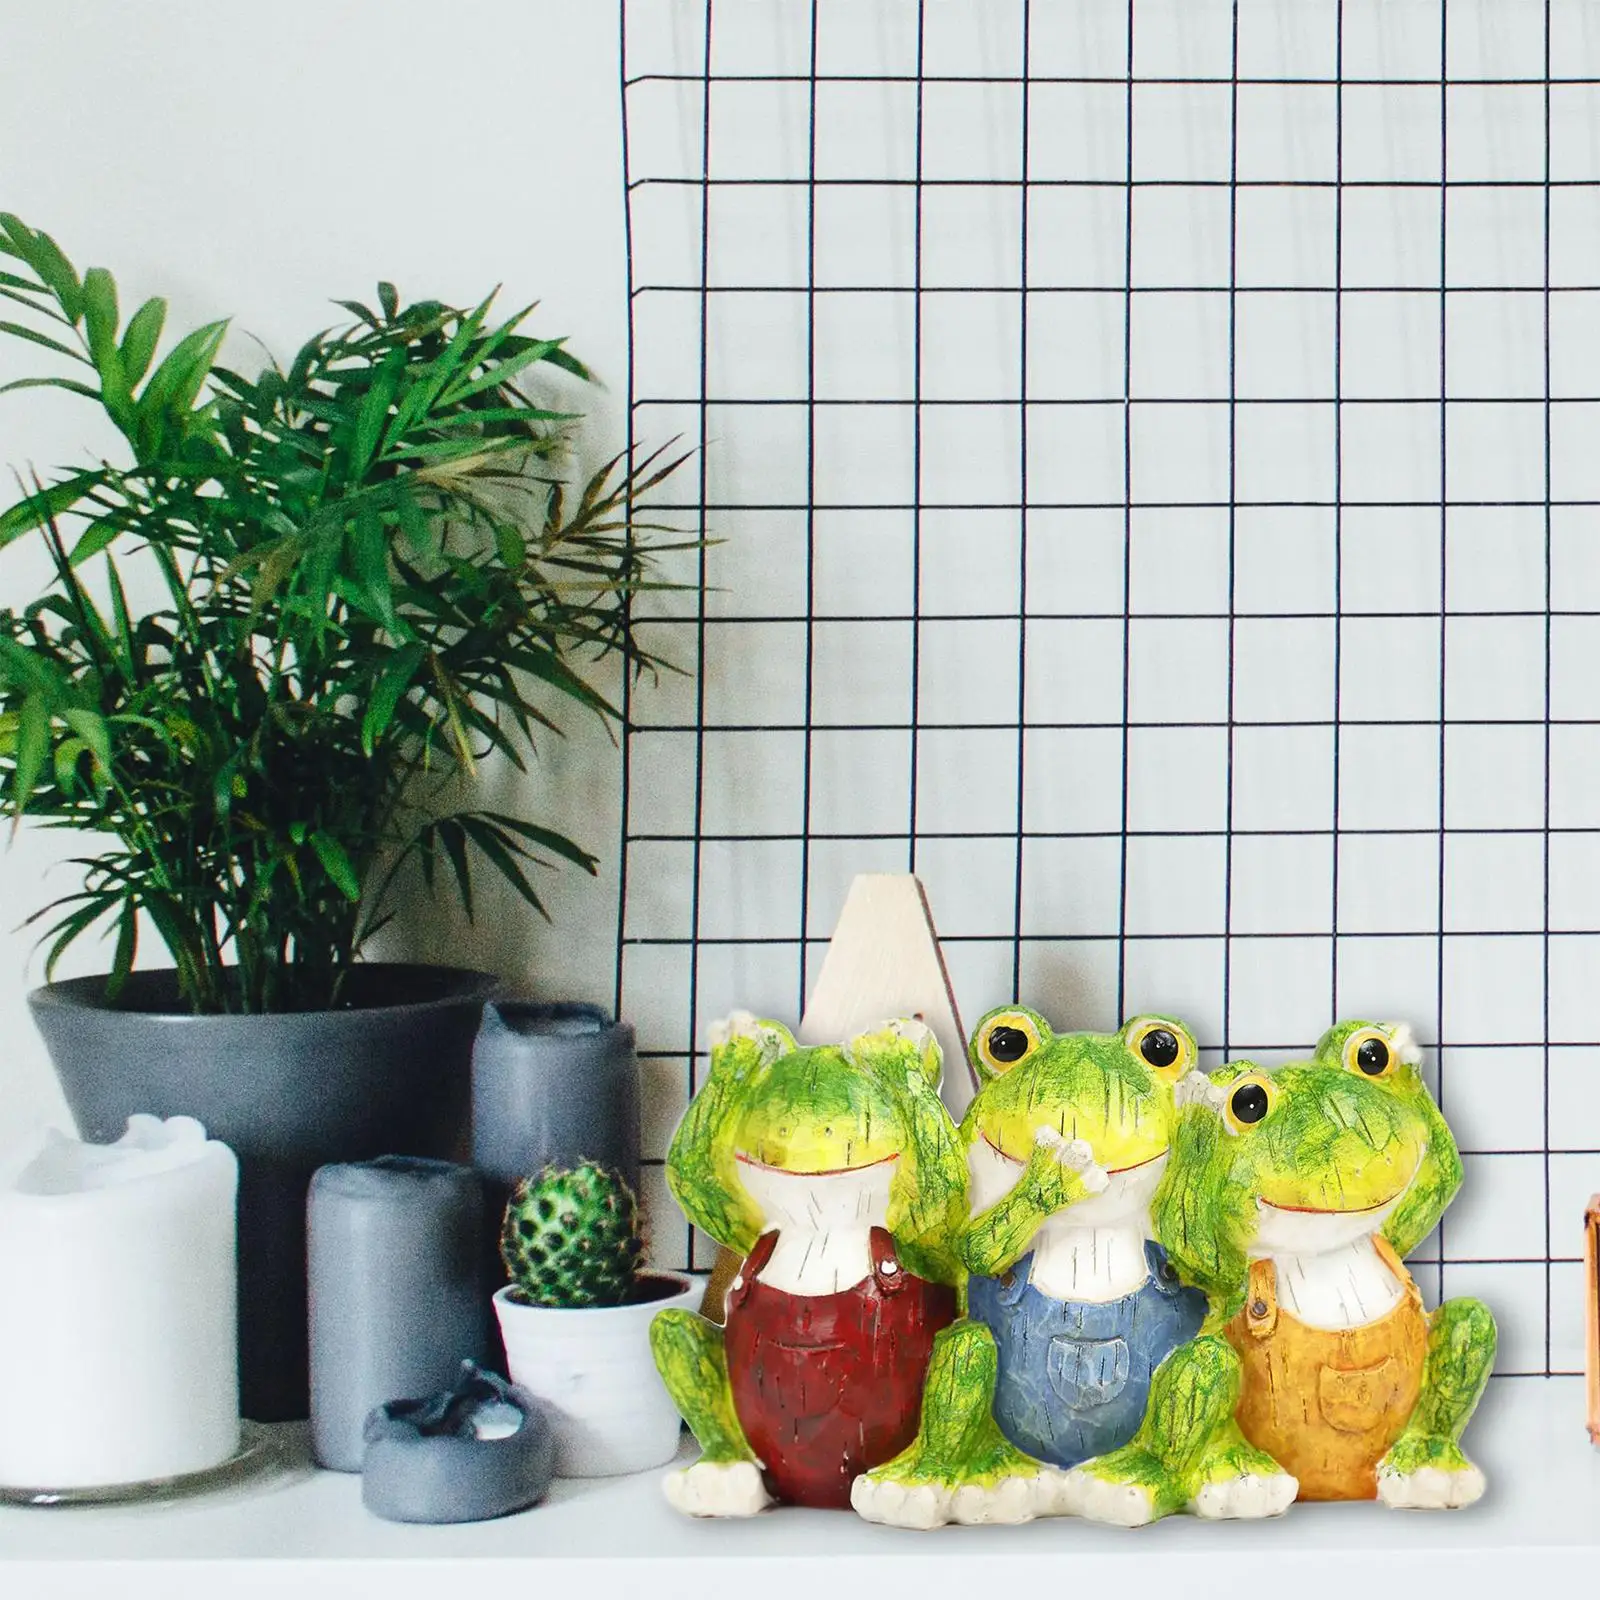 Statue Art Crafts Three Frogs Figurine for Office Decor Porch